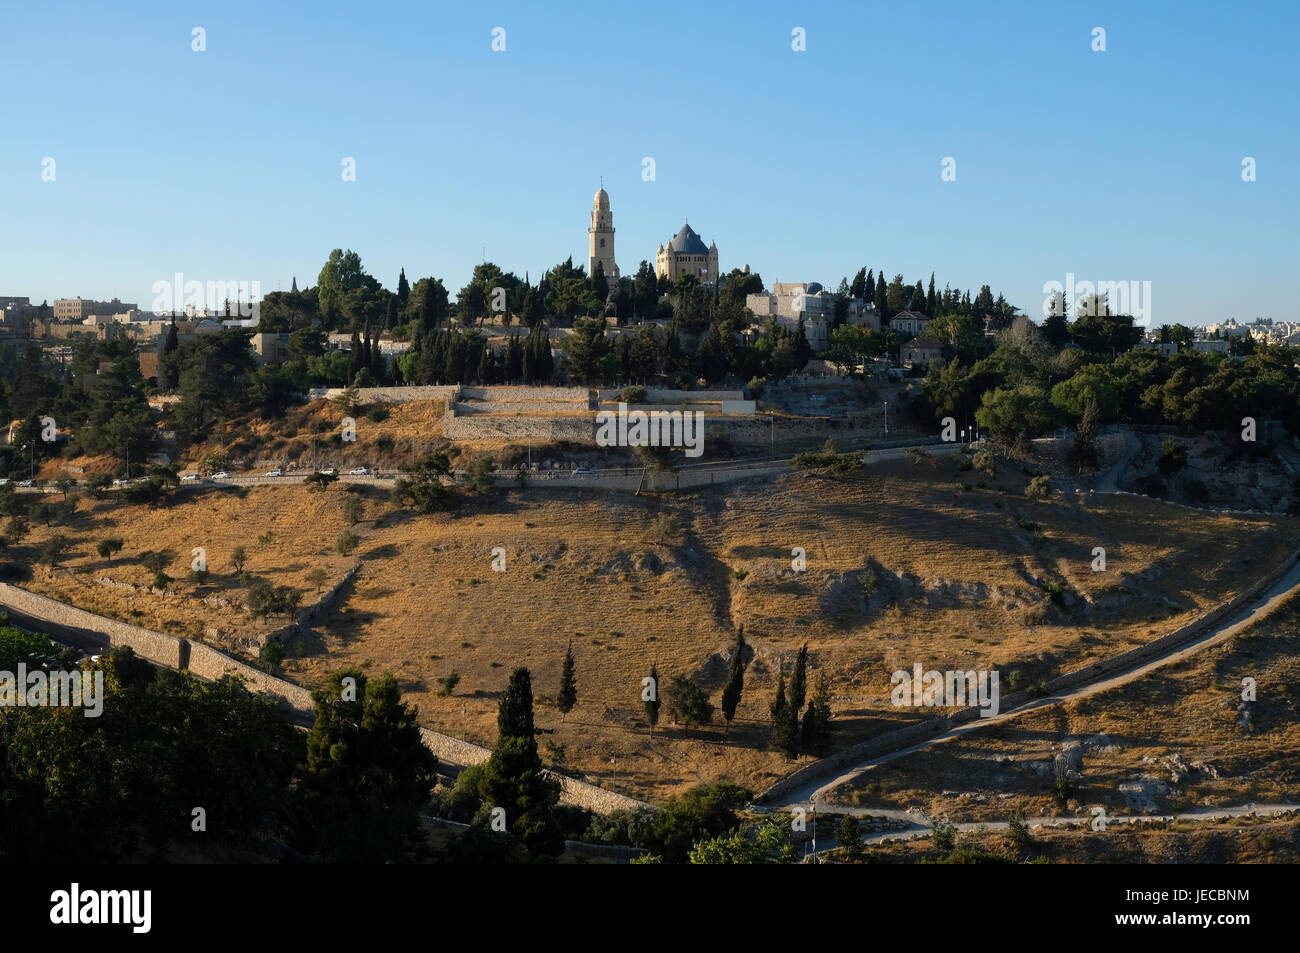 View of Valley of Hinnom the modern name for the biblical Gehenna or Gehinnom valley and the Conical dome and bell tower of the Church of the Dormition or Hagia Maria Sion Abbey on mount Zion in East Jerusalem Israel Stock Photo